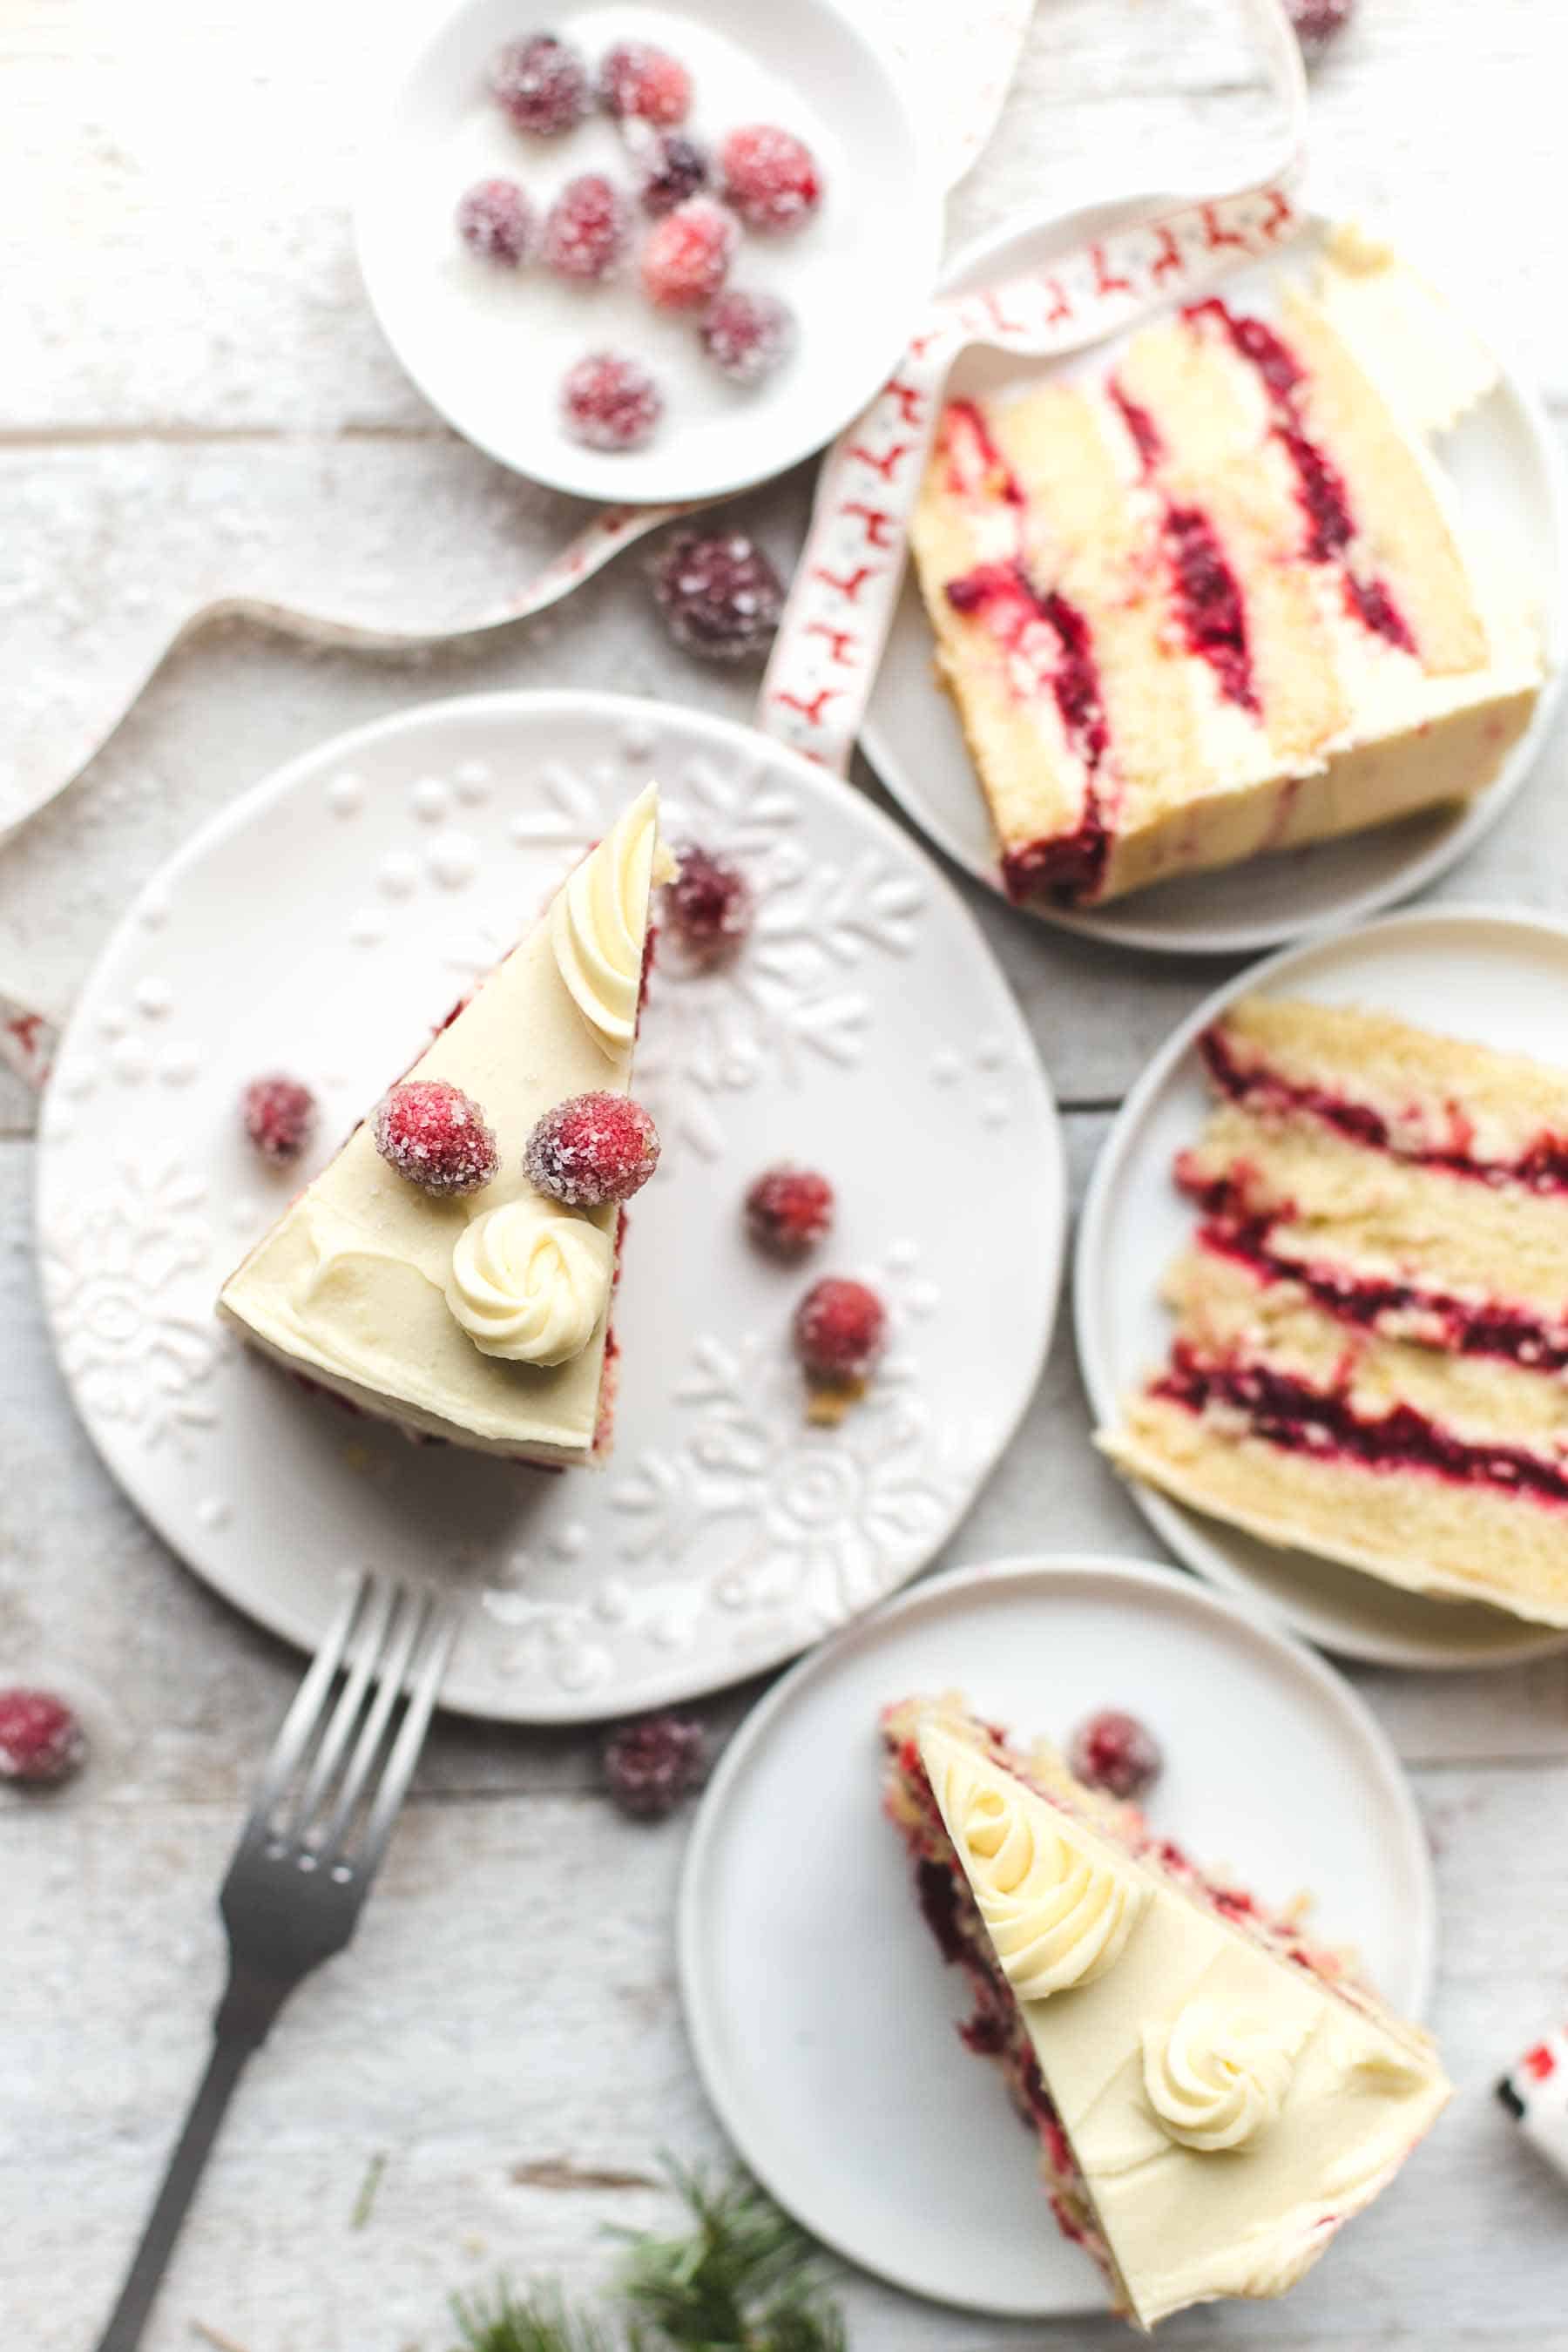 Slice of Cranberry Orange Cake with White Chocolate Frosting on a plate